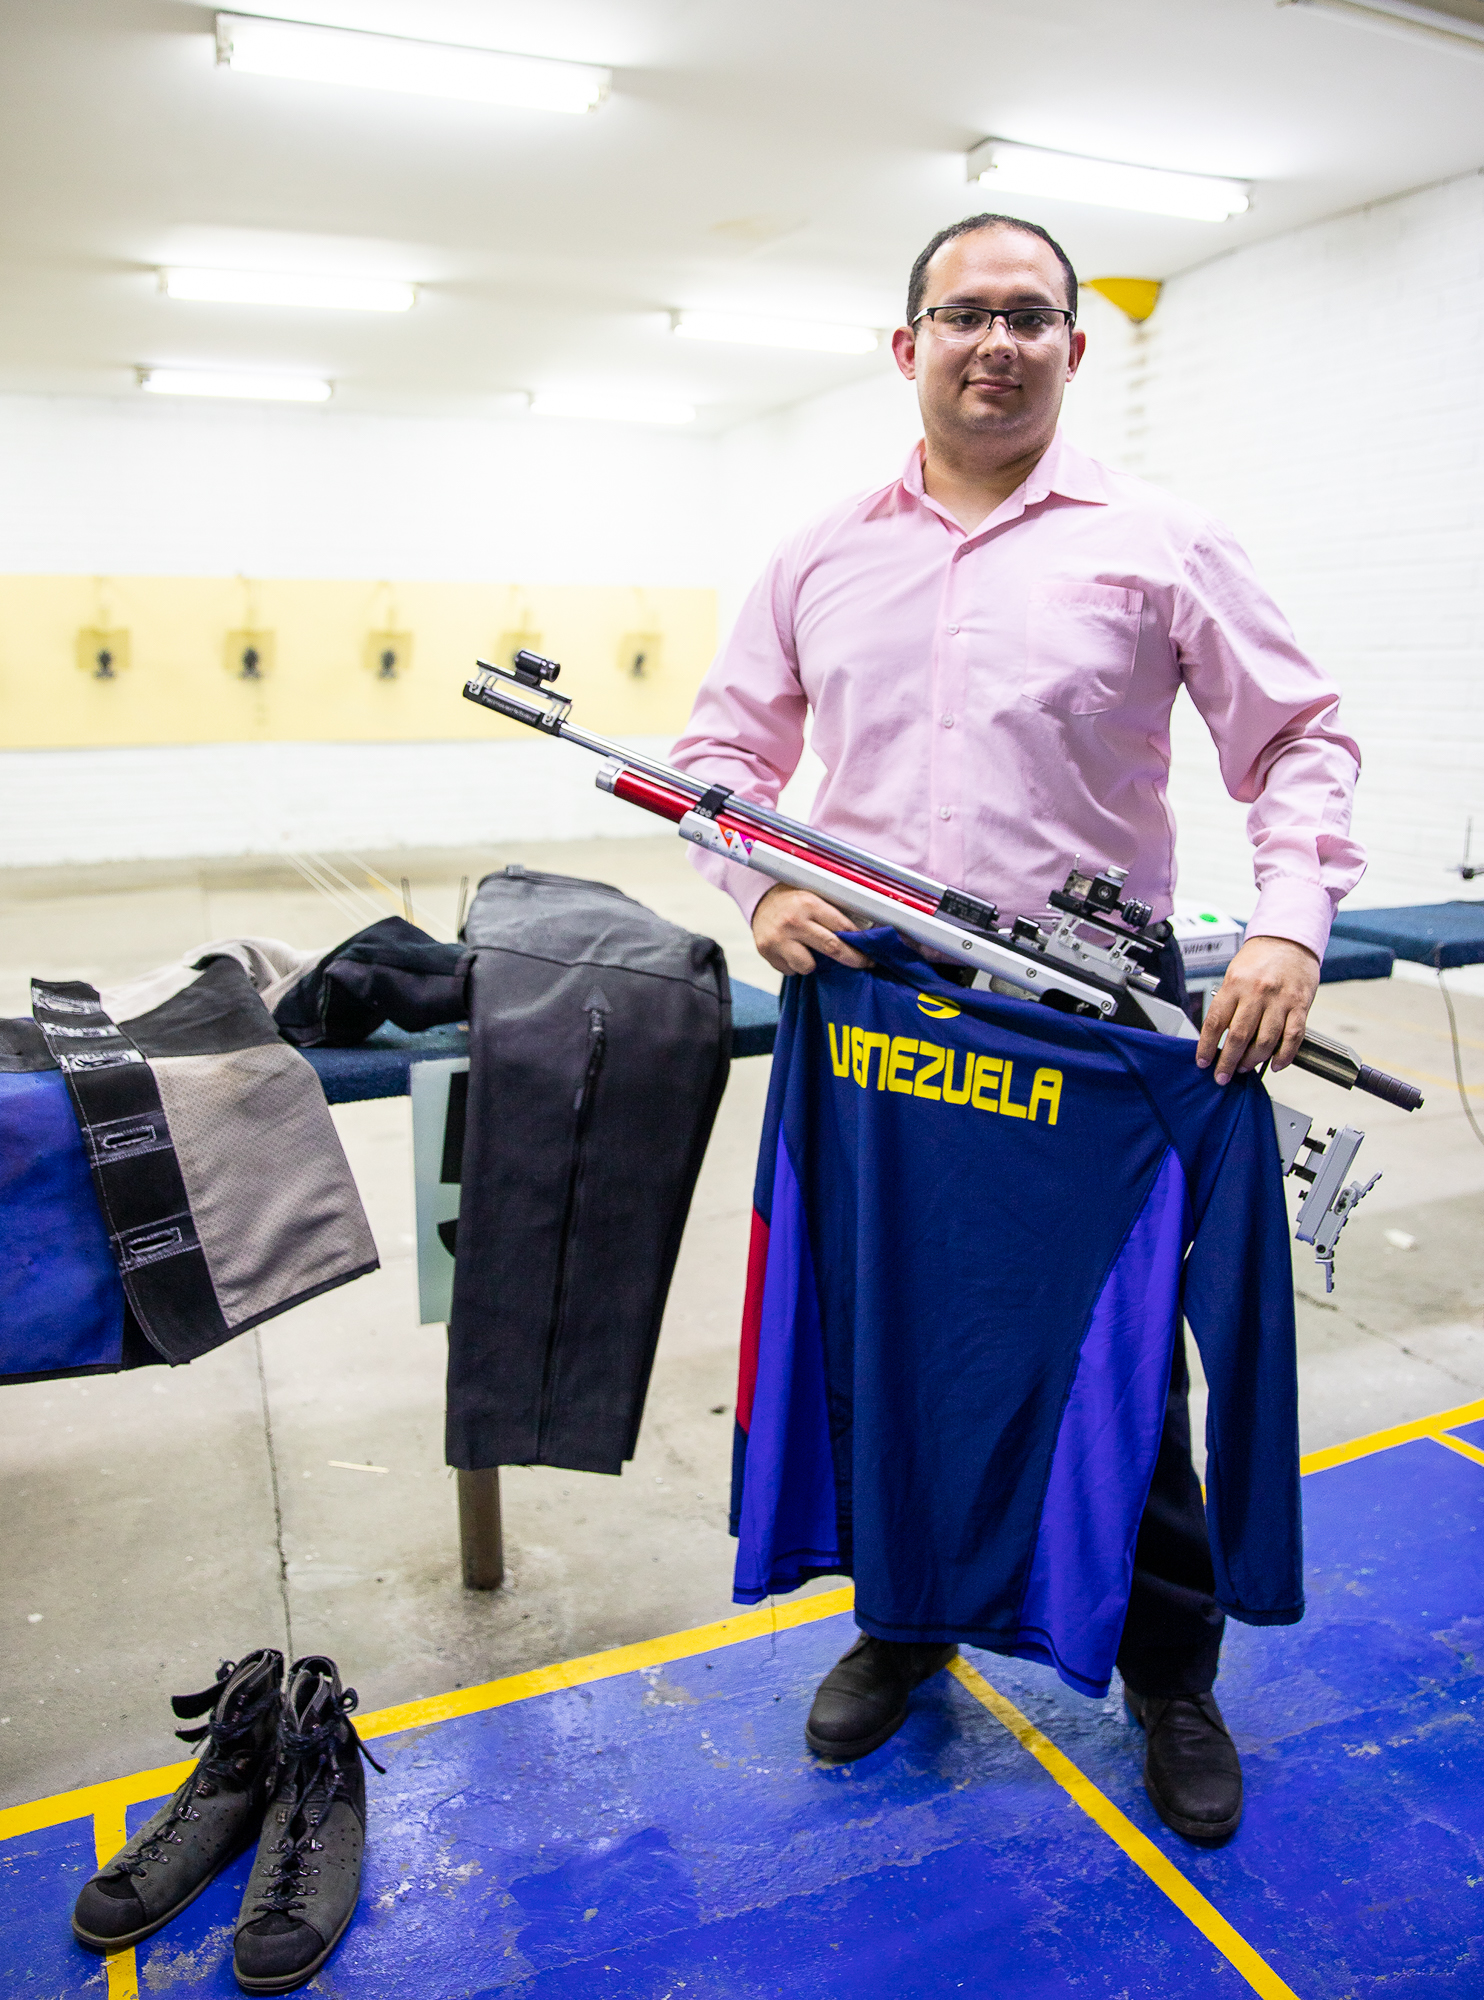 A man posing for a portrait in a button-up shirt holds an olympic shooting rifle while holding a Venezuela jersey inside of a shooting range